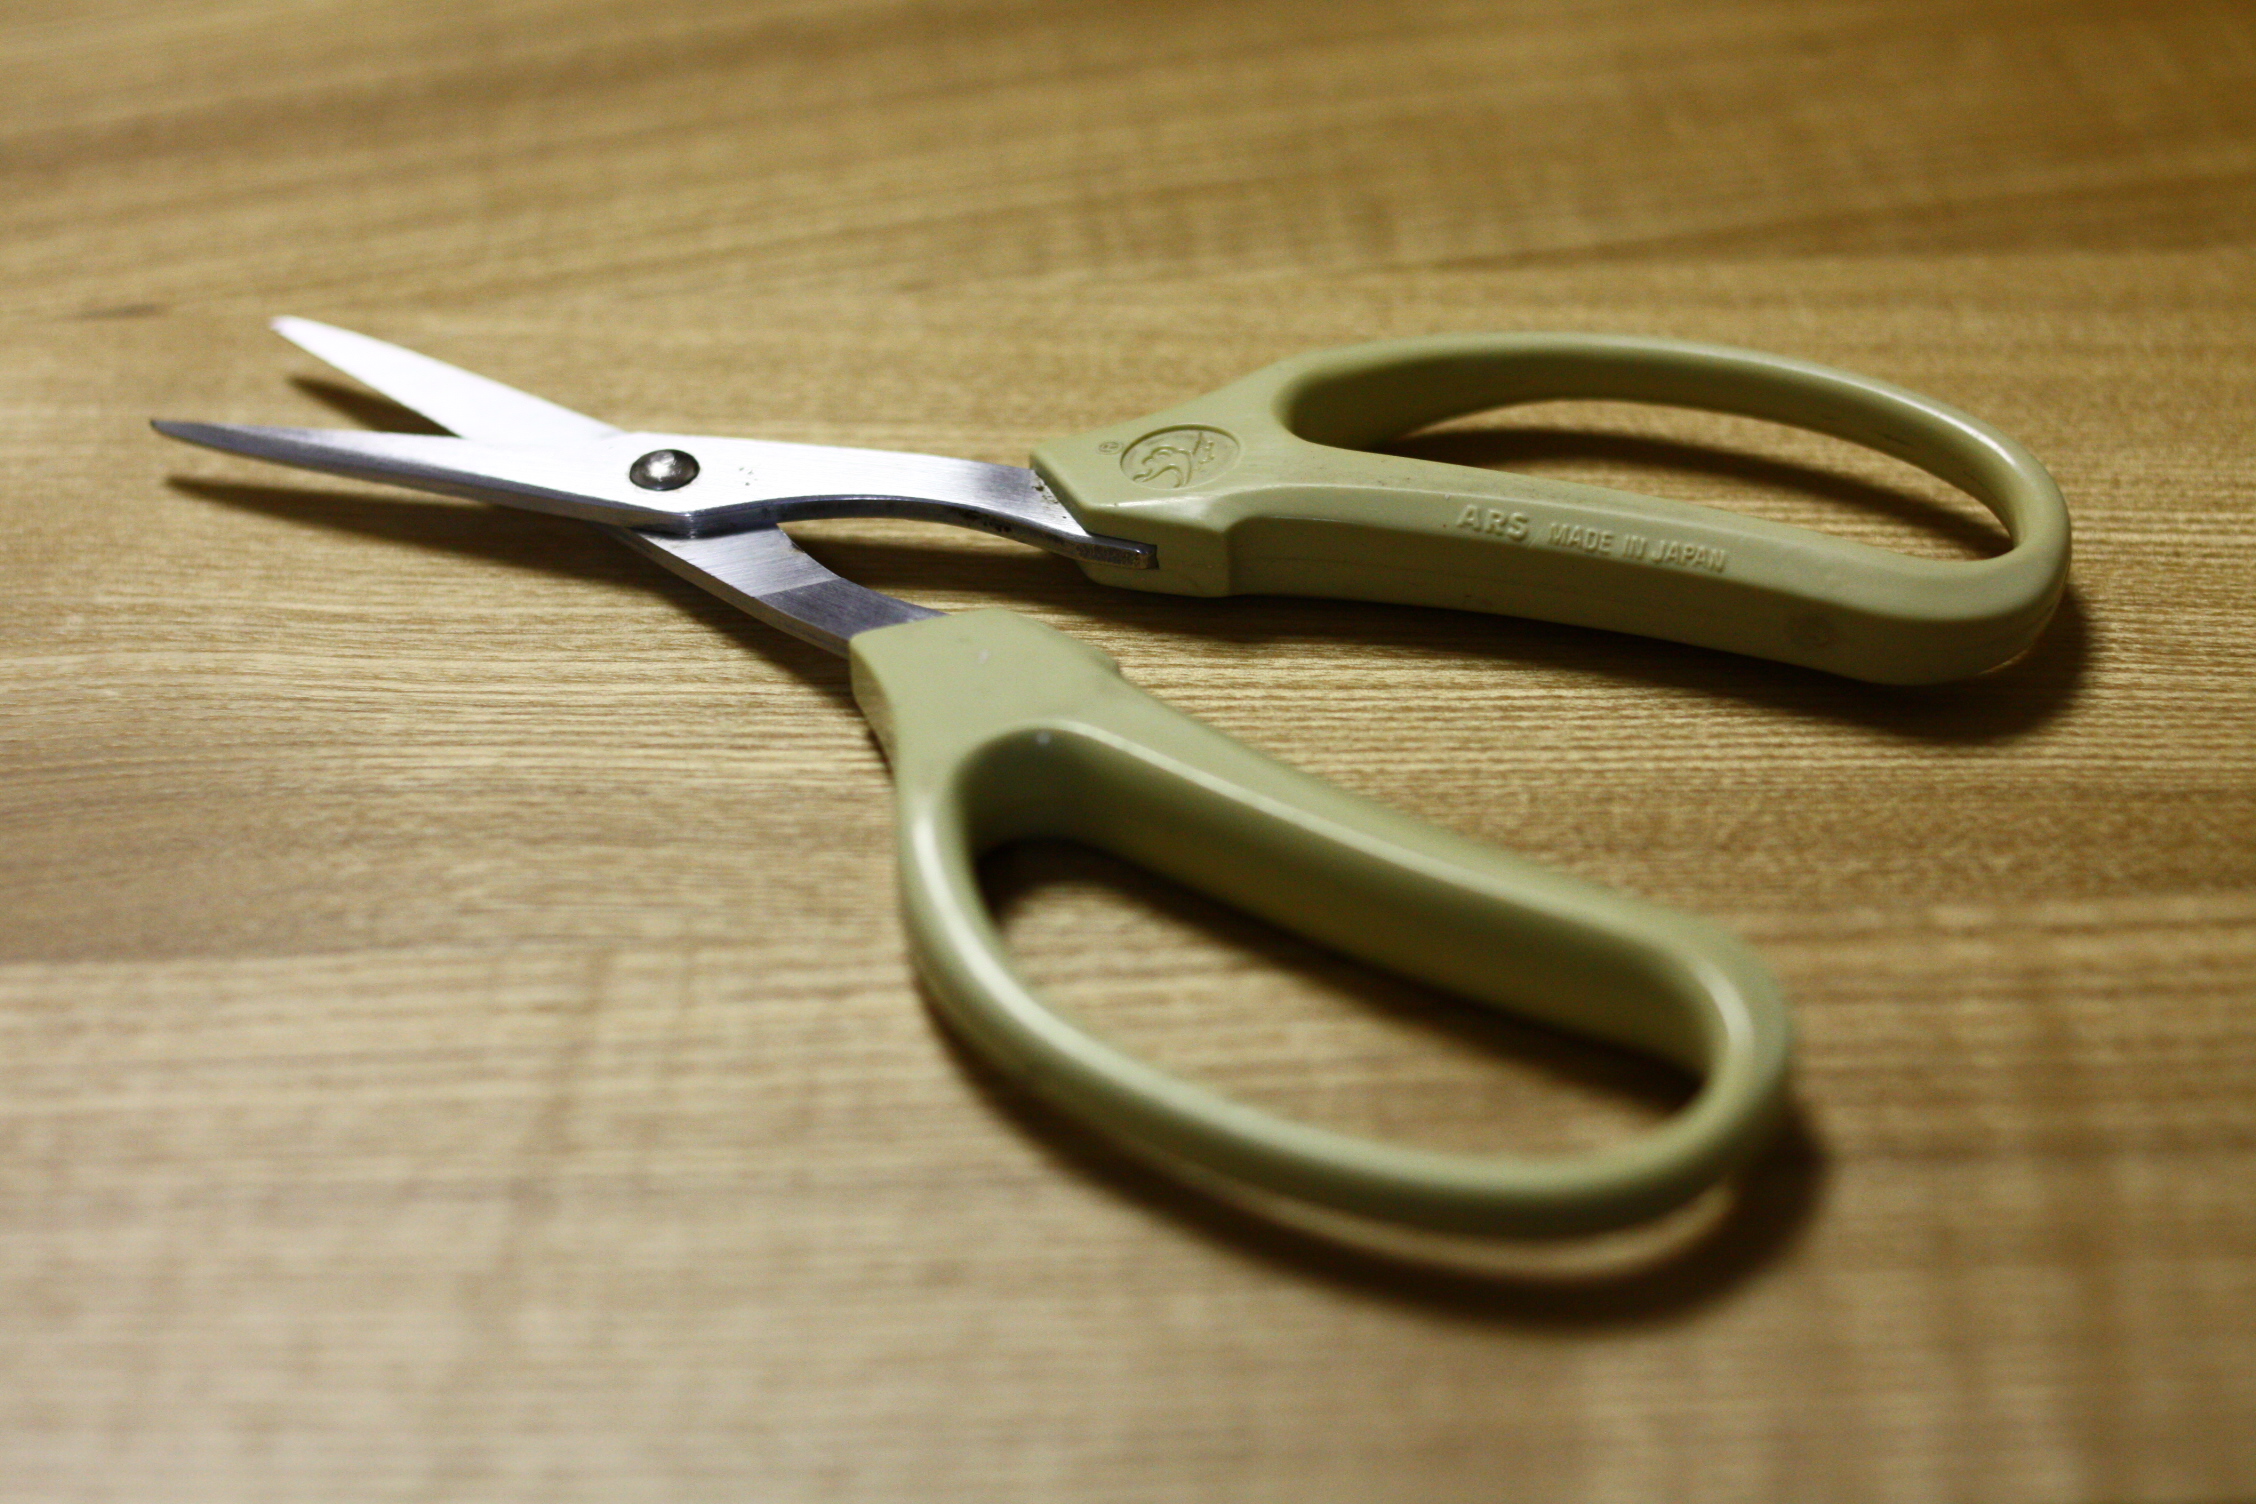 the pair of scissors is on the wooden table